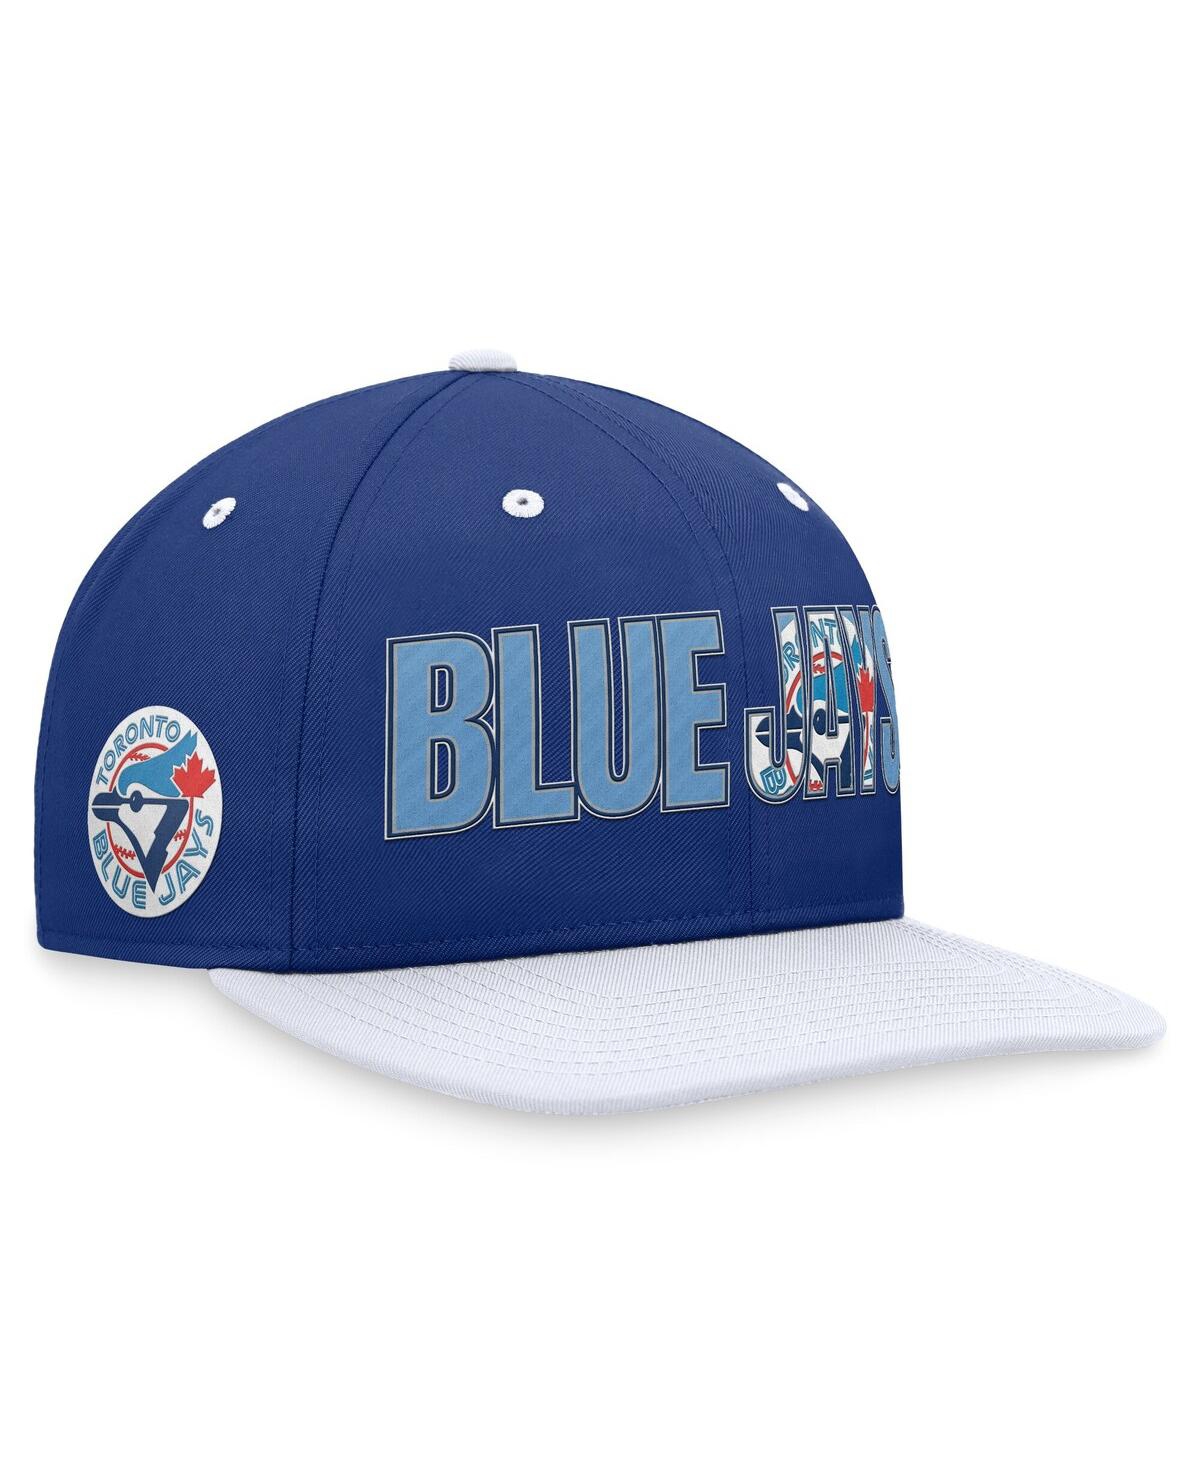 Nike Men's  Royal Toronto Blue Jays Cooperstown Collection Pro Snapback Hat